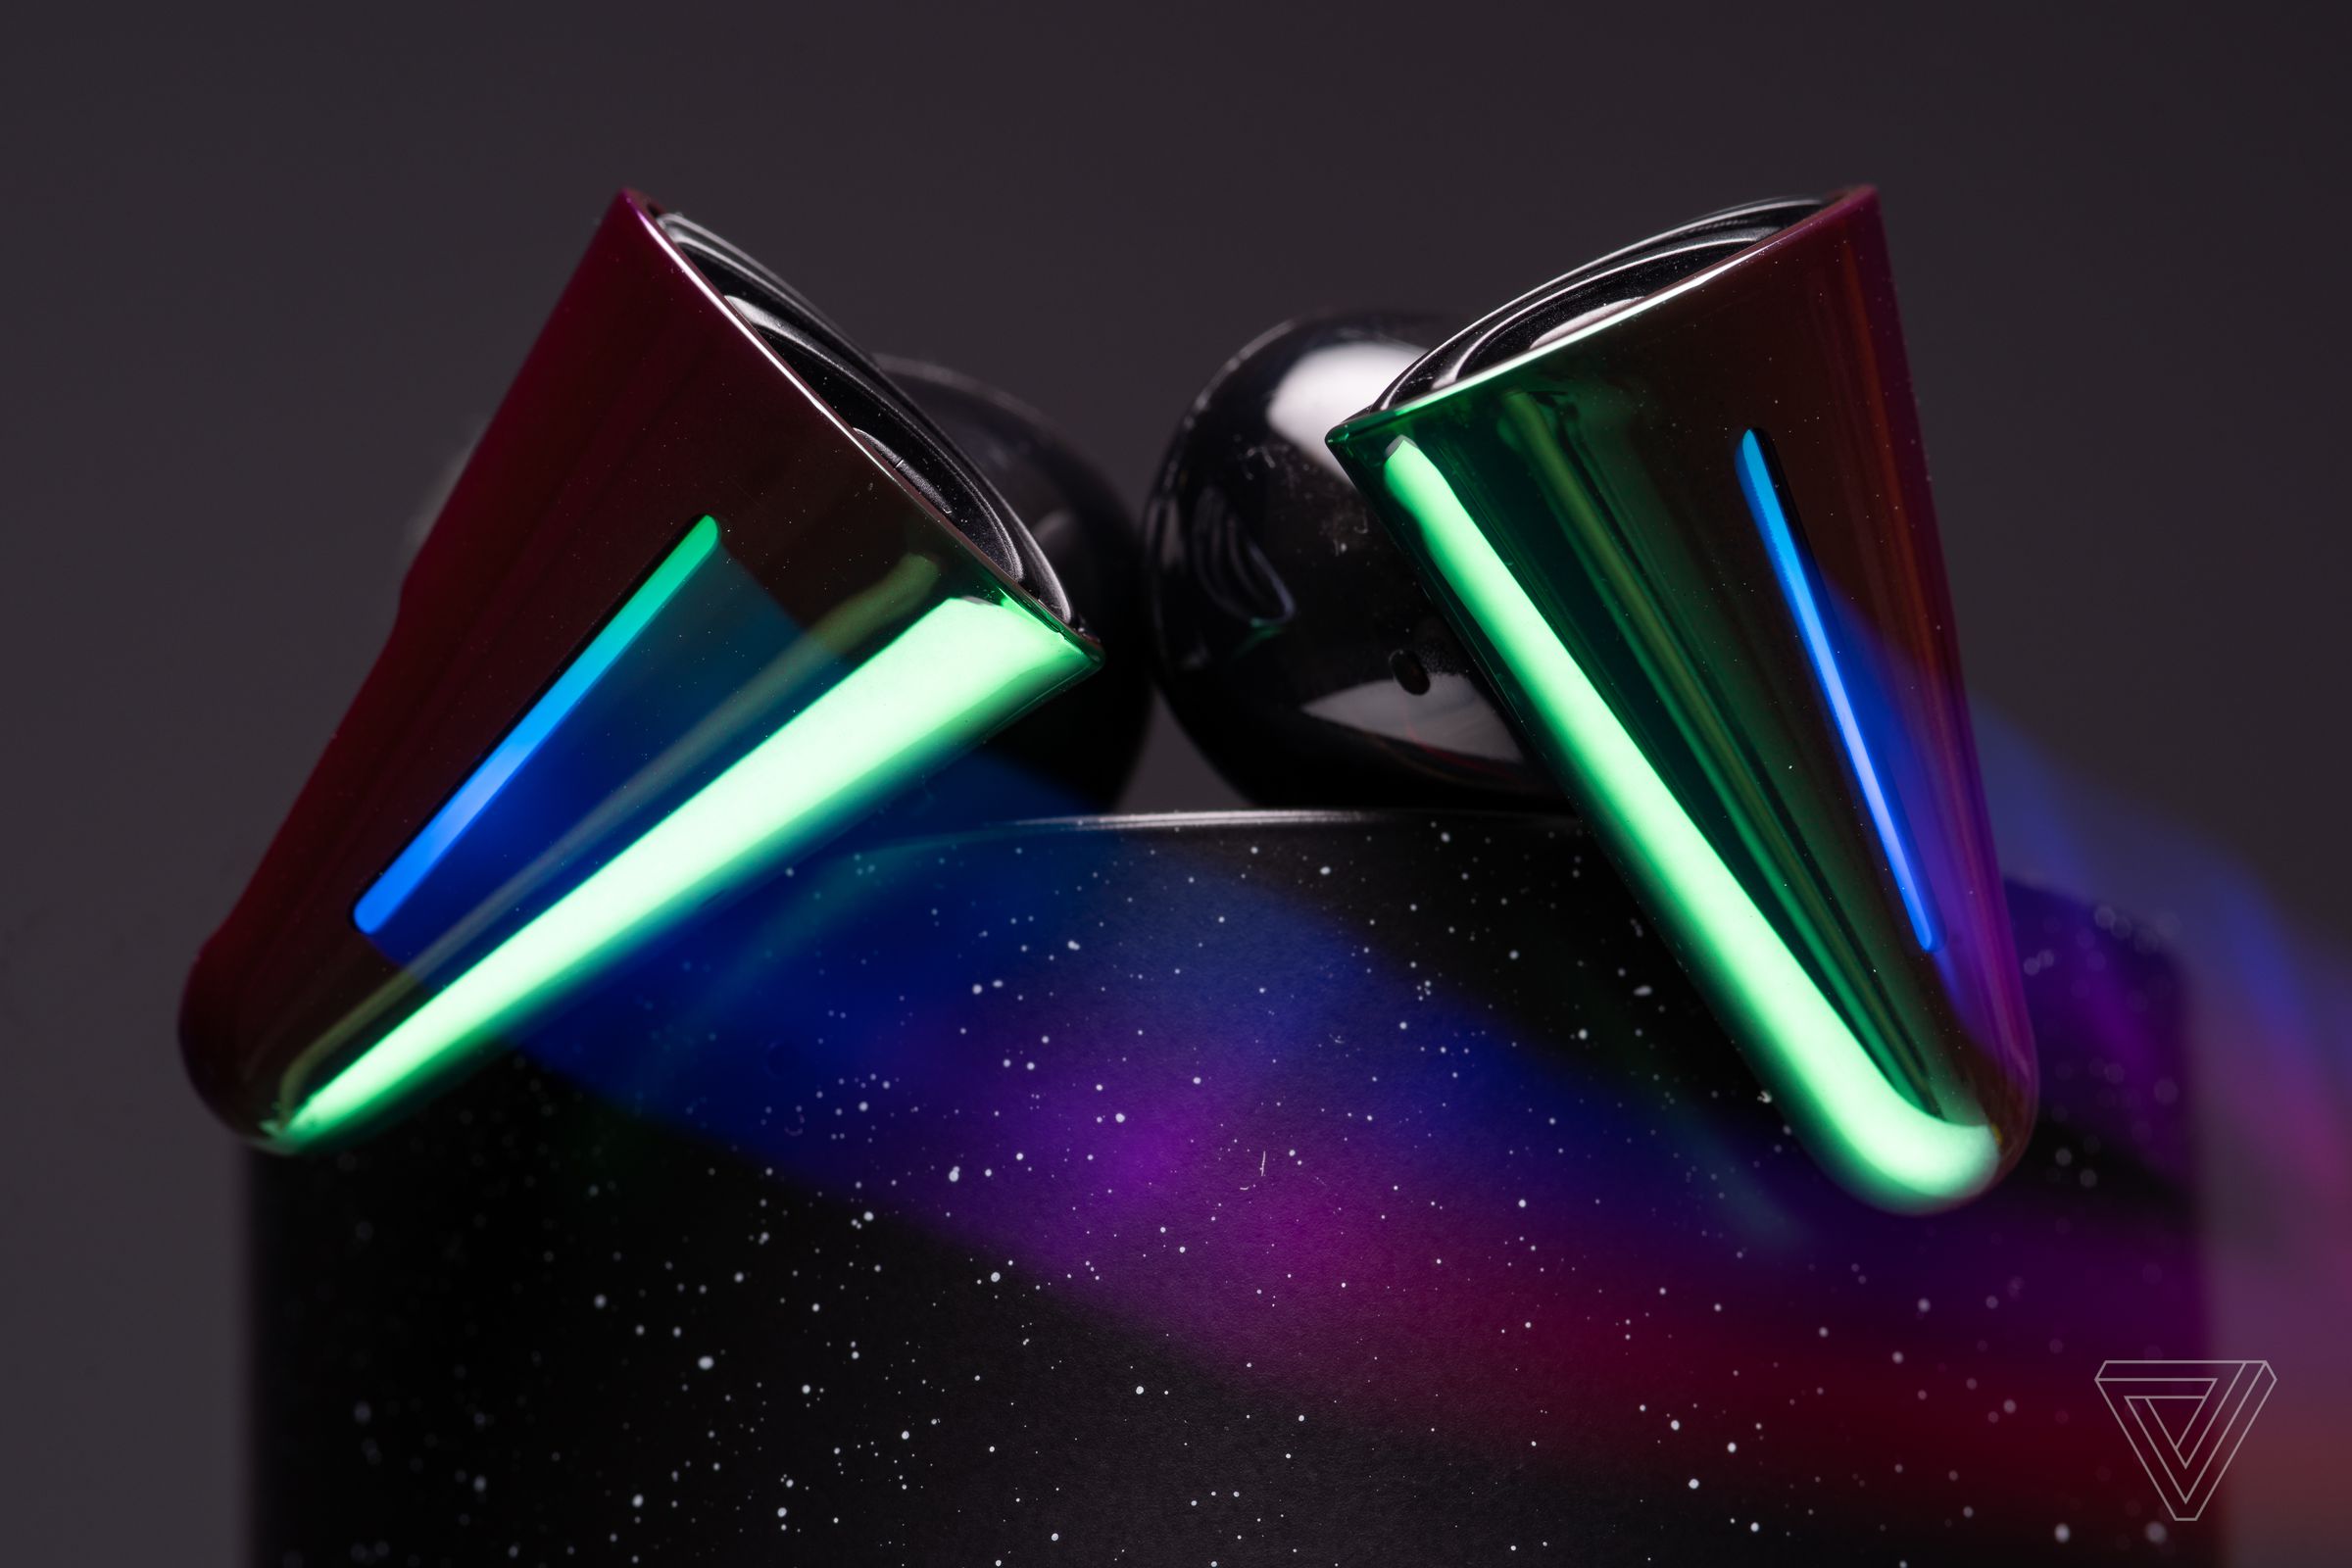 The Cyberblades feature a unique design, customizable RGB lighting, and a charging case with a starry sky aesthetic.